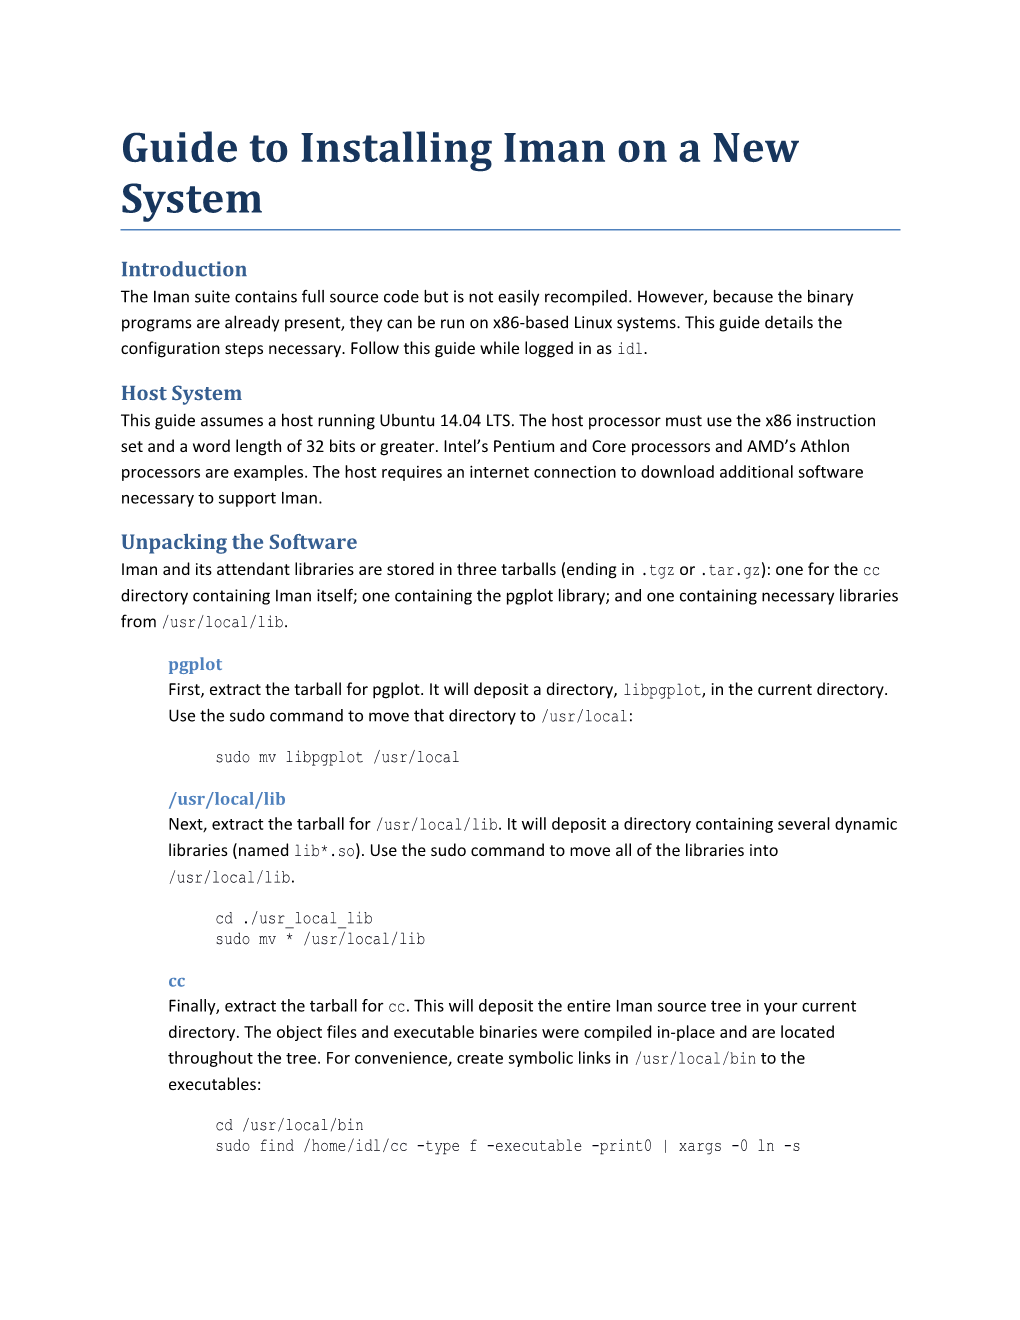 Guide to Installing Iman on a New System